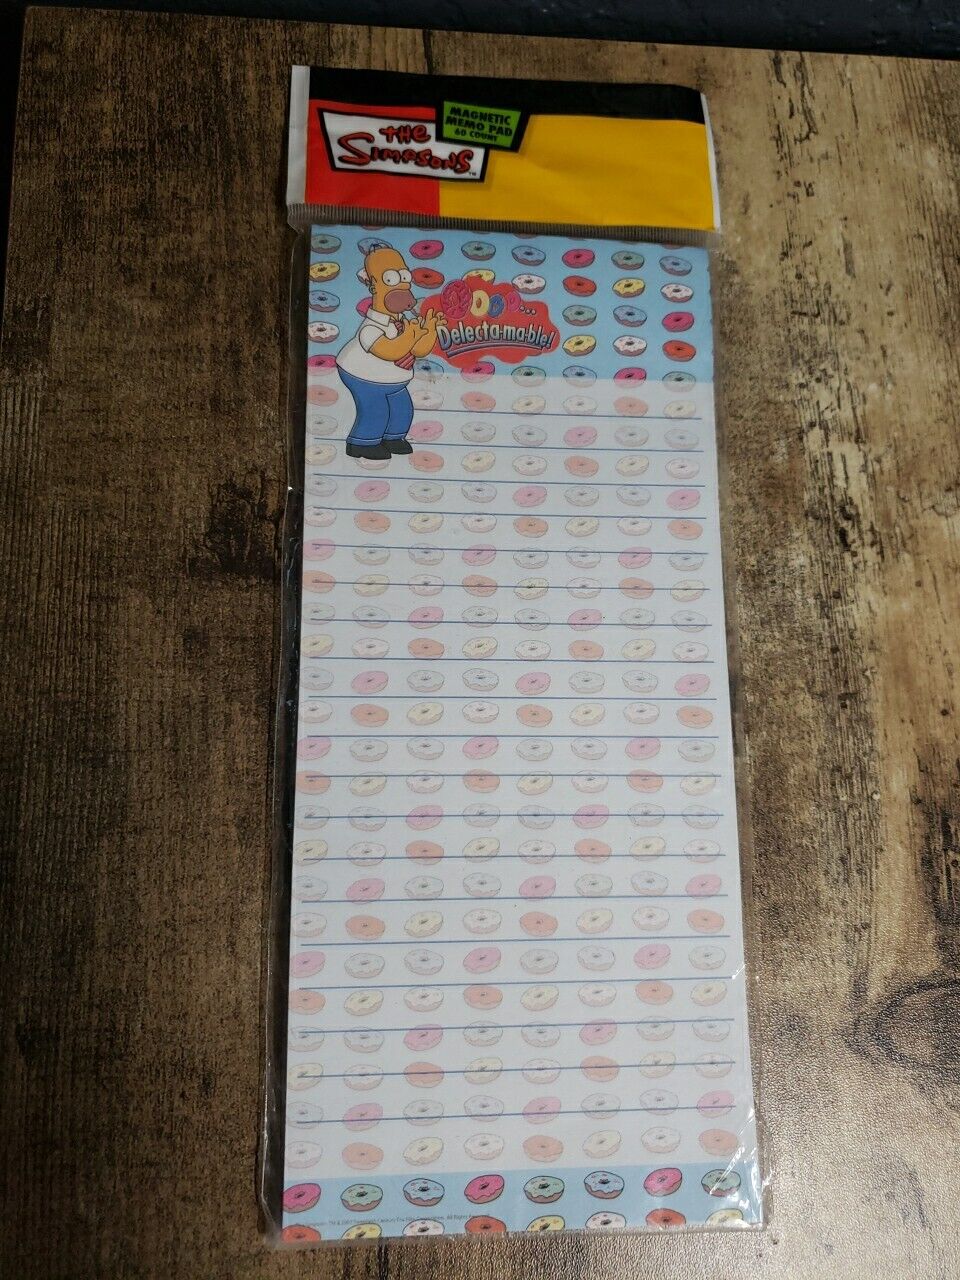 The Simpsons Magnetic Memo Pad, 60 Sheets - Homer & Donuts - Delecta-ma-ble